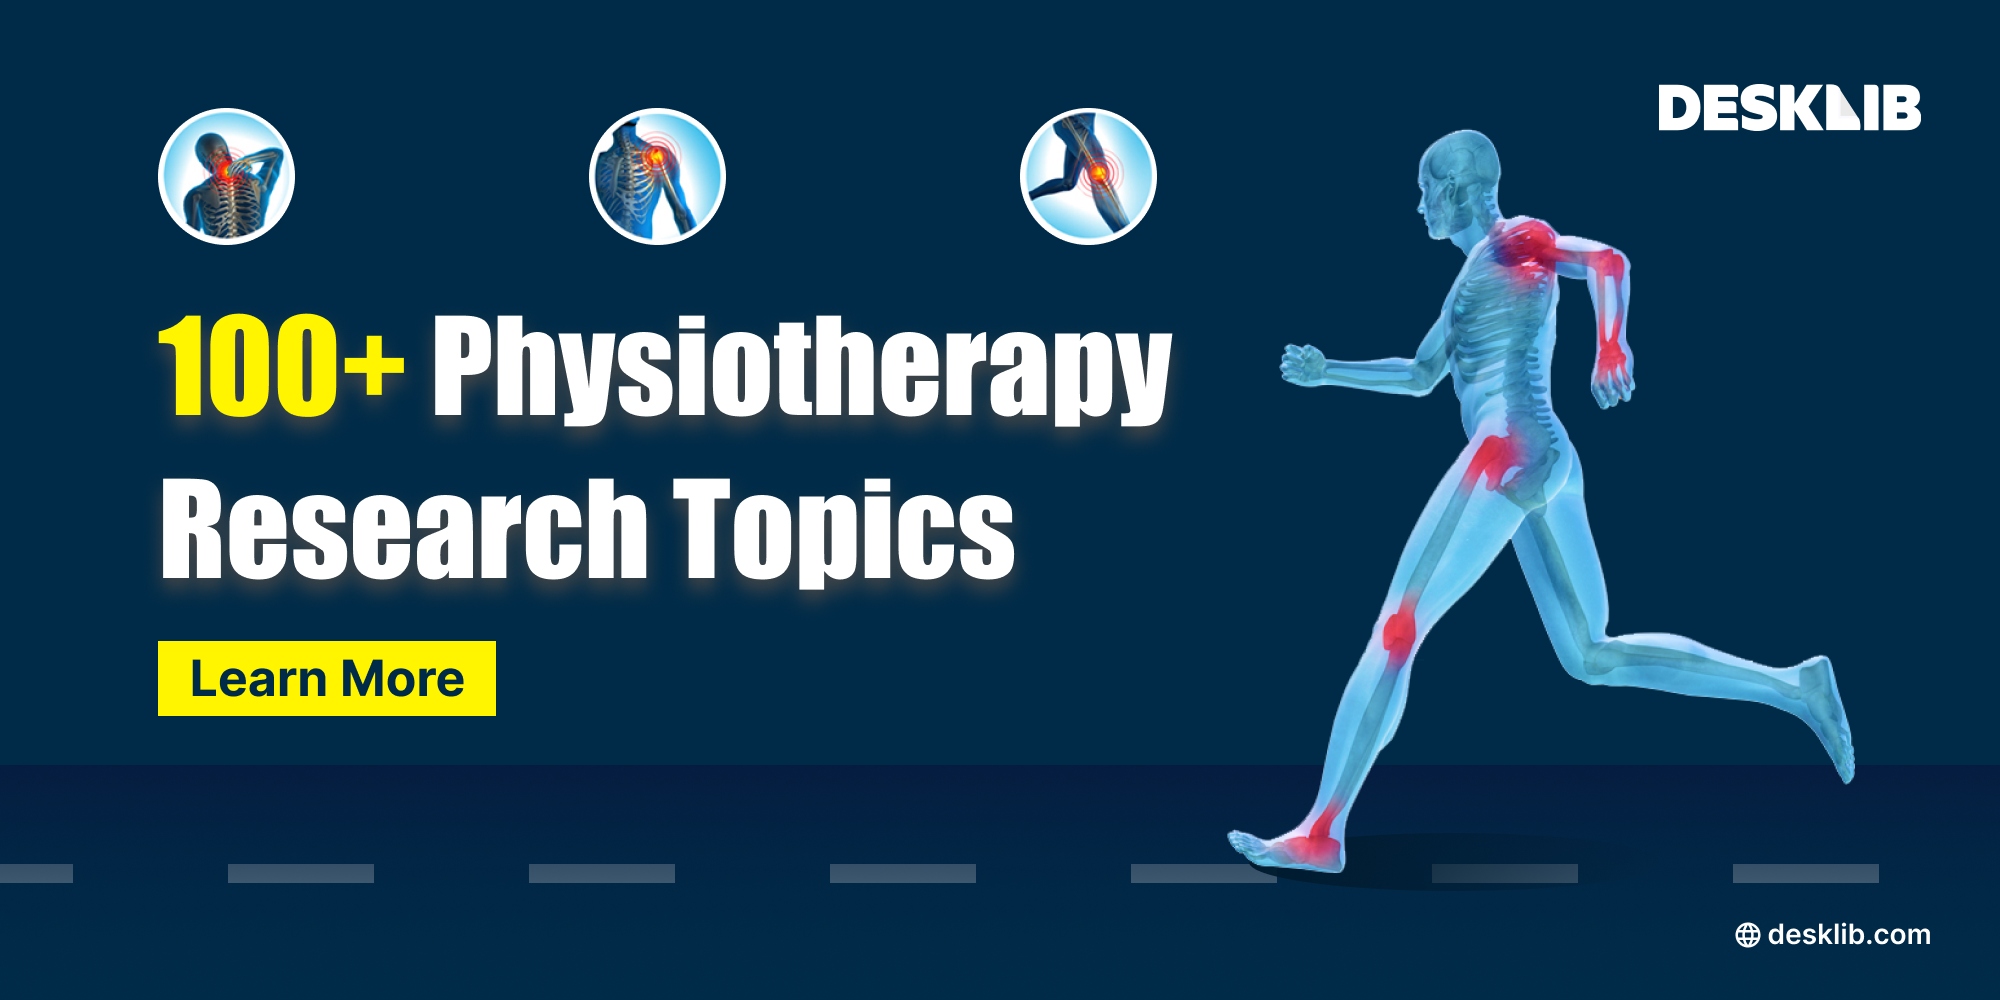 research topics for physiotherapy students